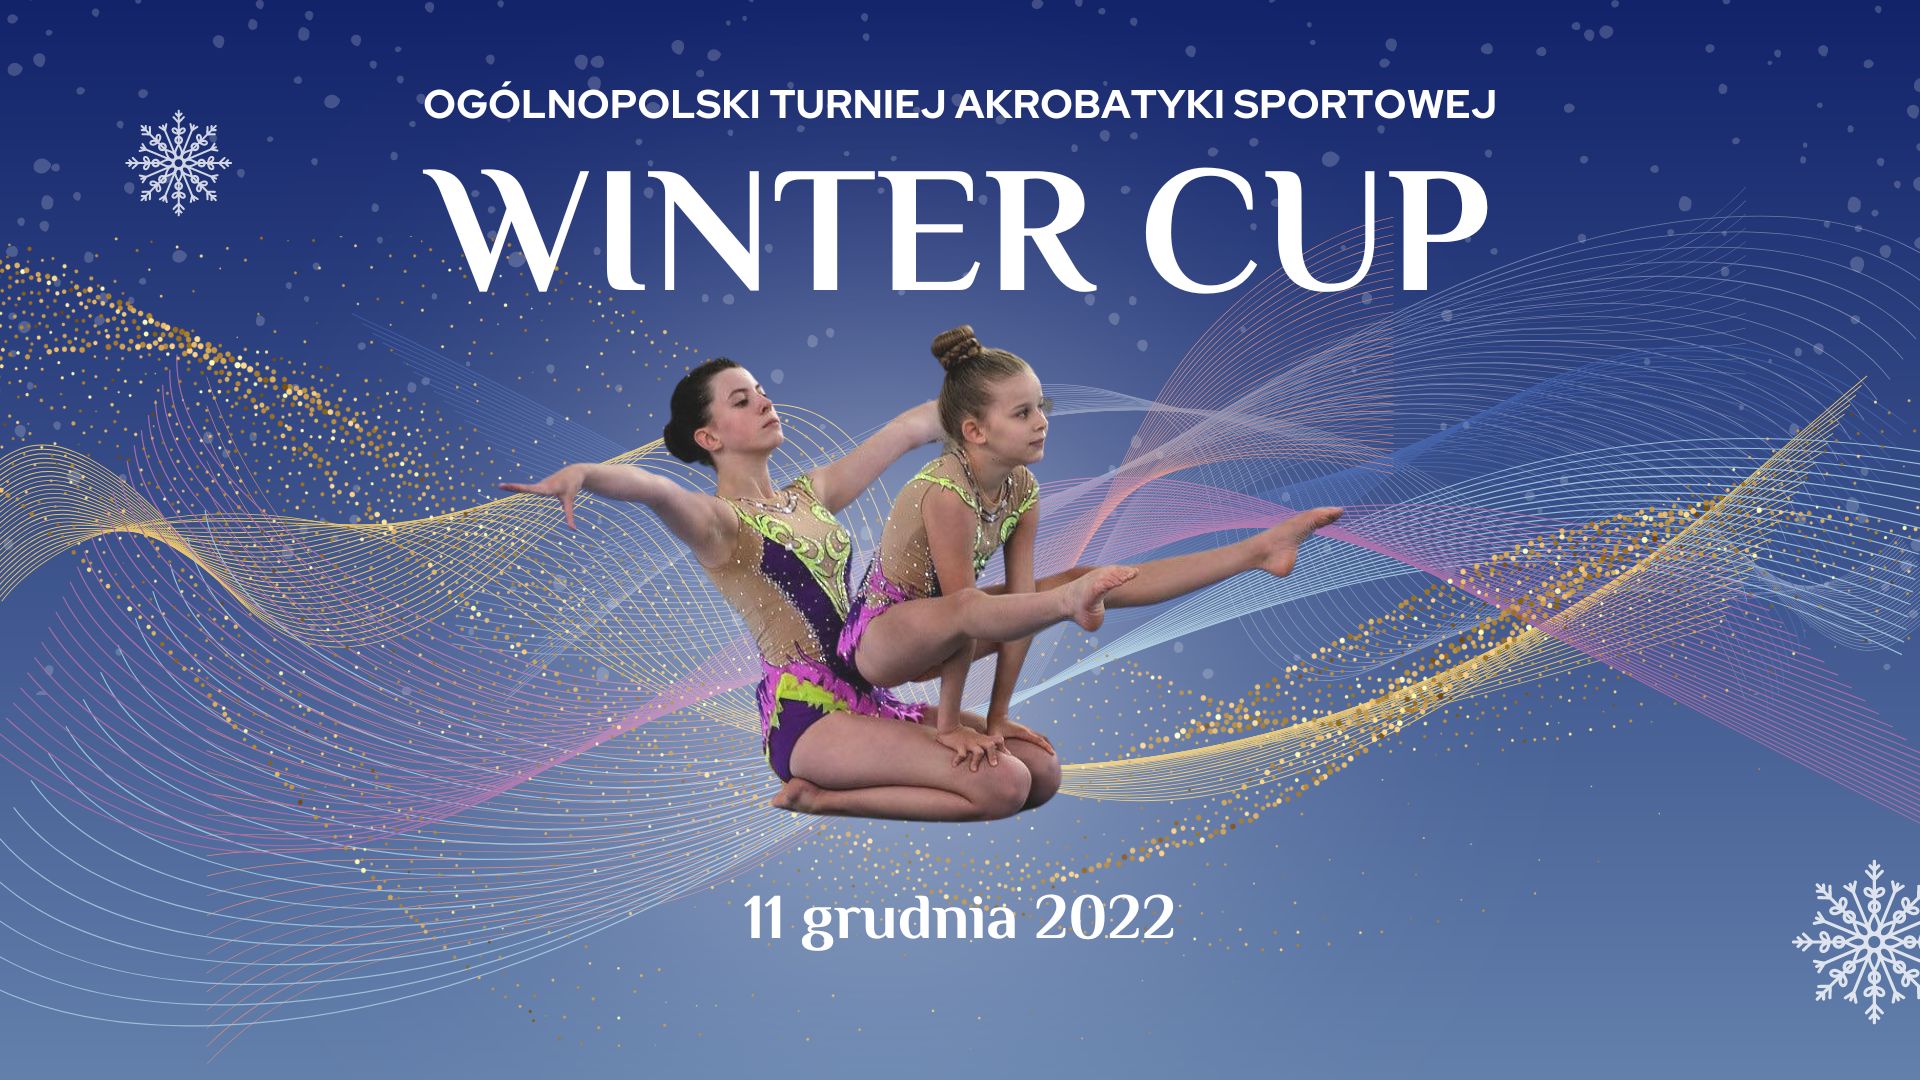 WINTER CUP 2022